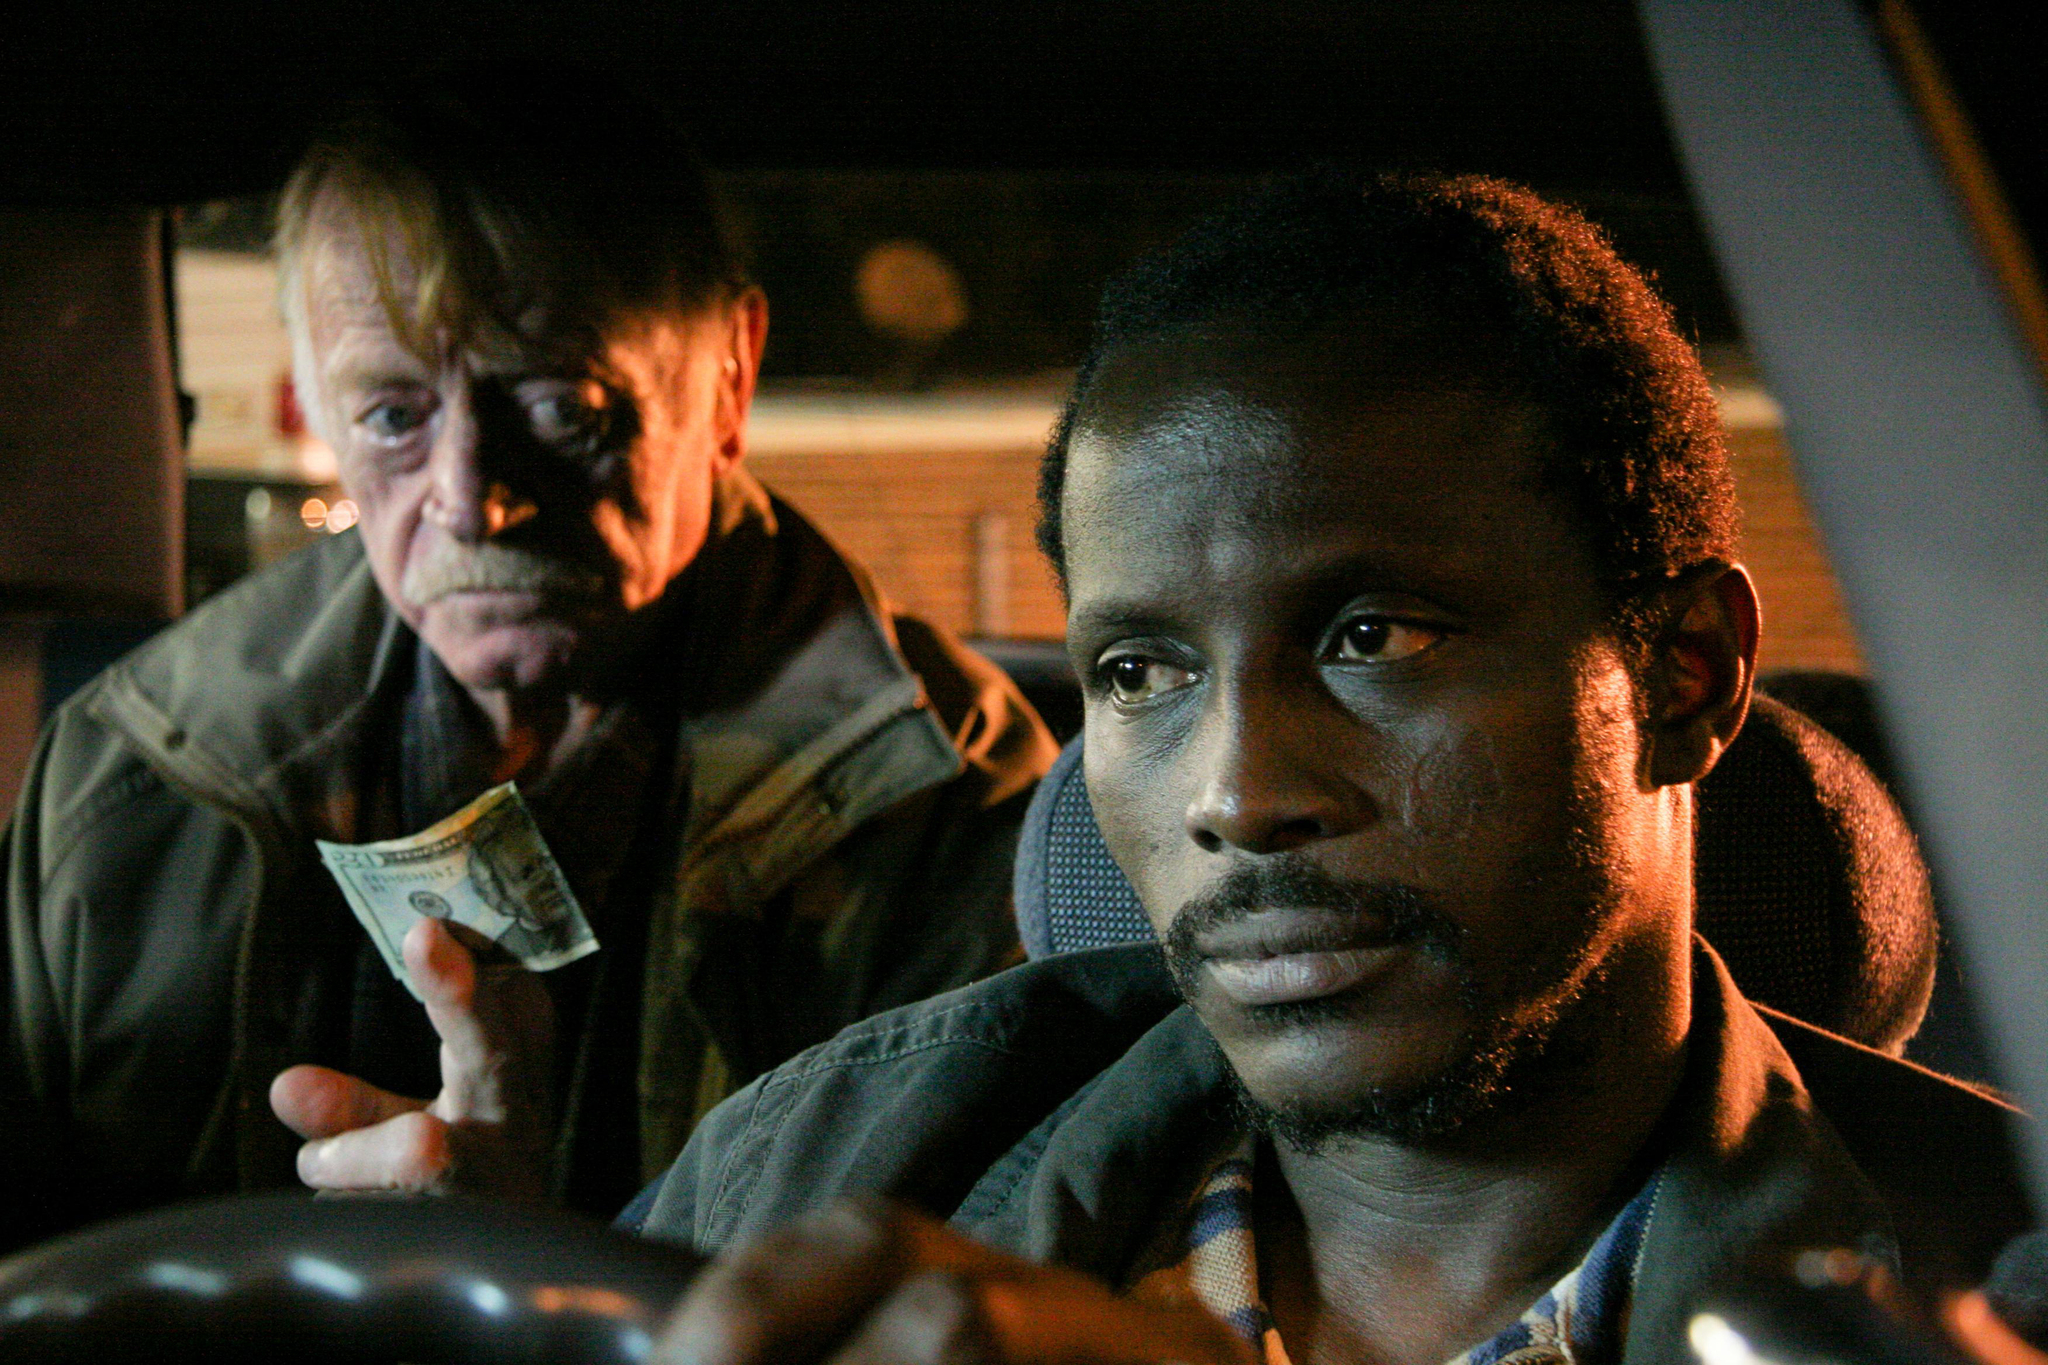 Still of Red West and Souleymane Sy Savane in Goodbye Solo (2008)